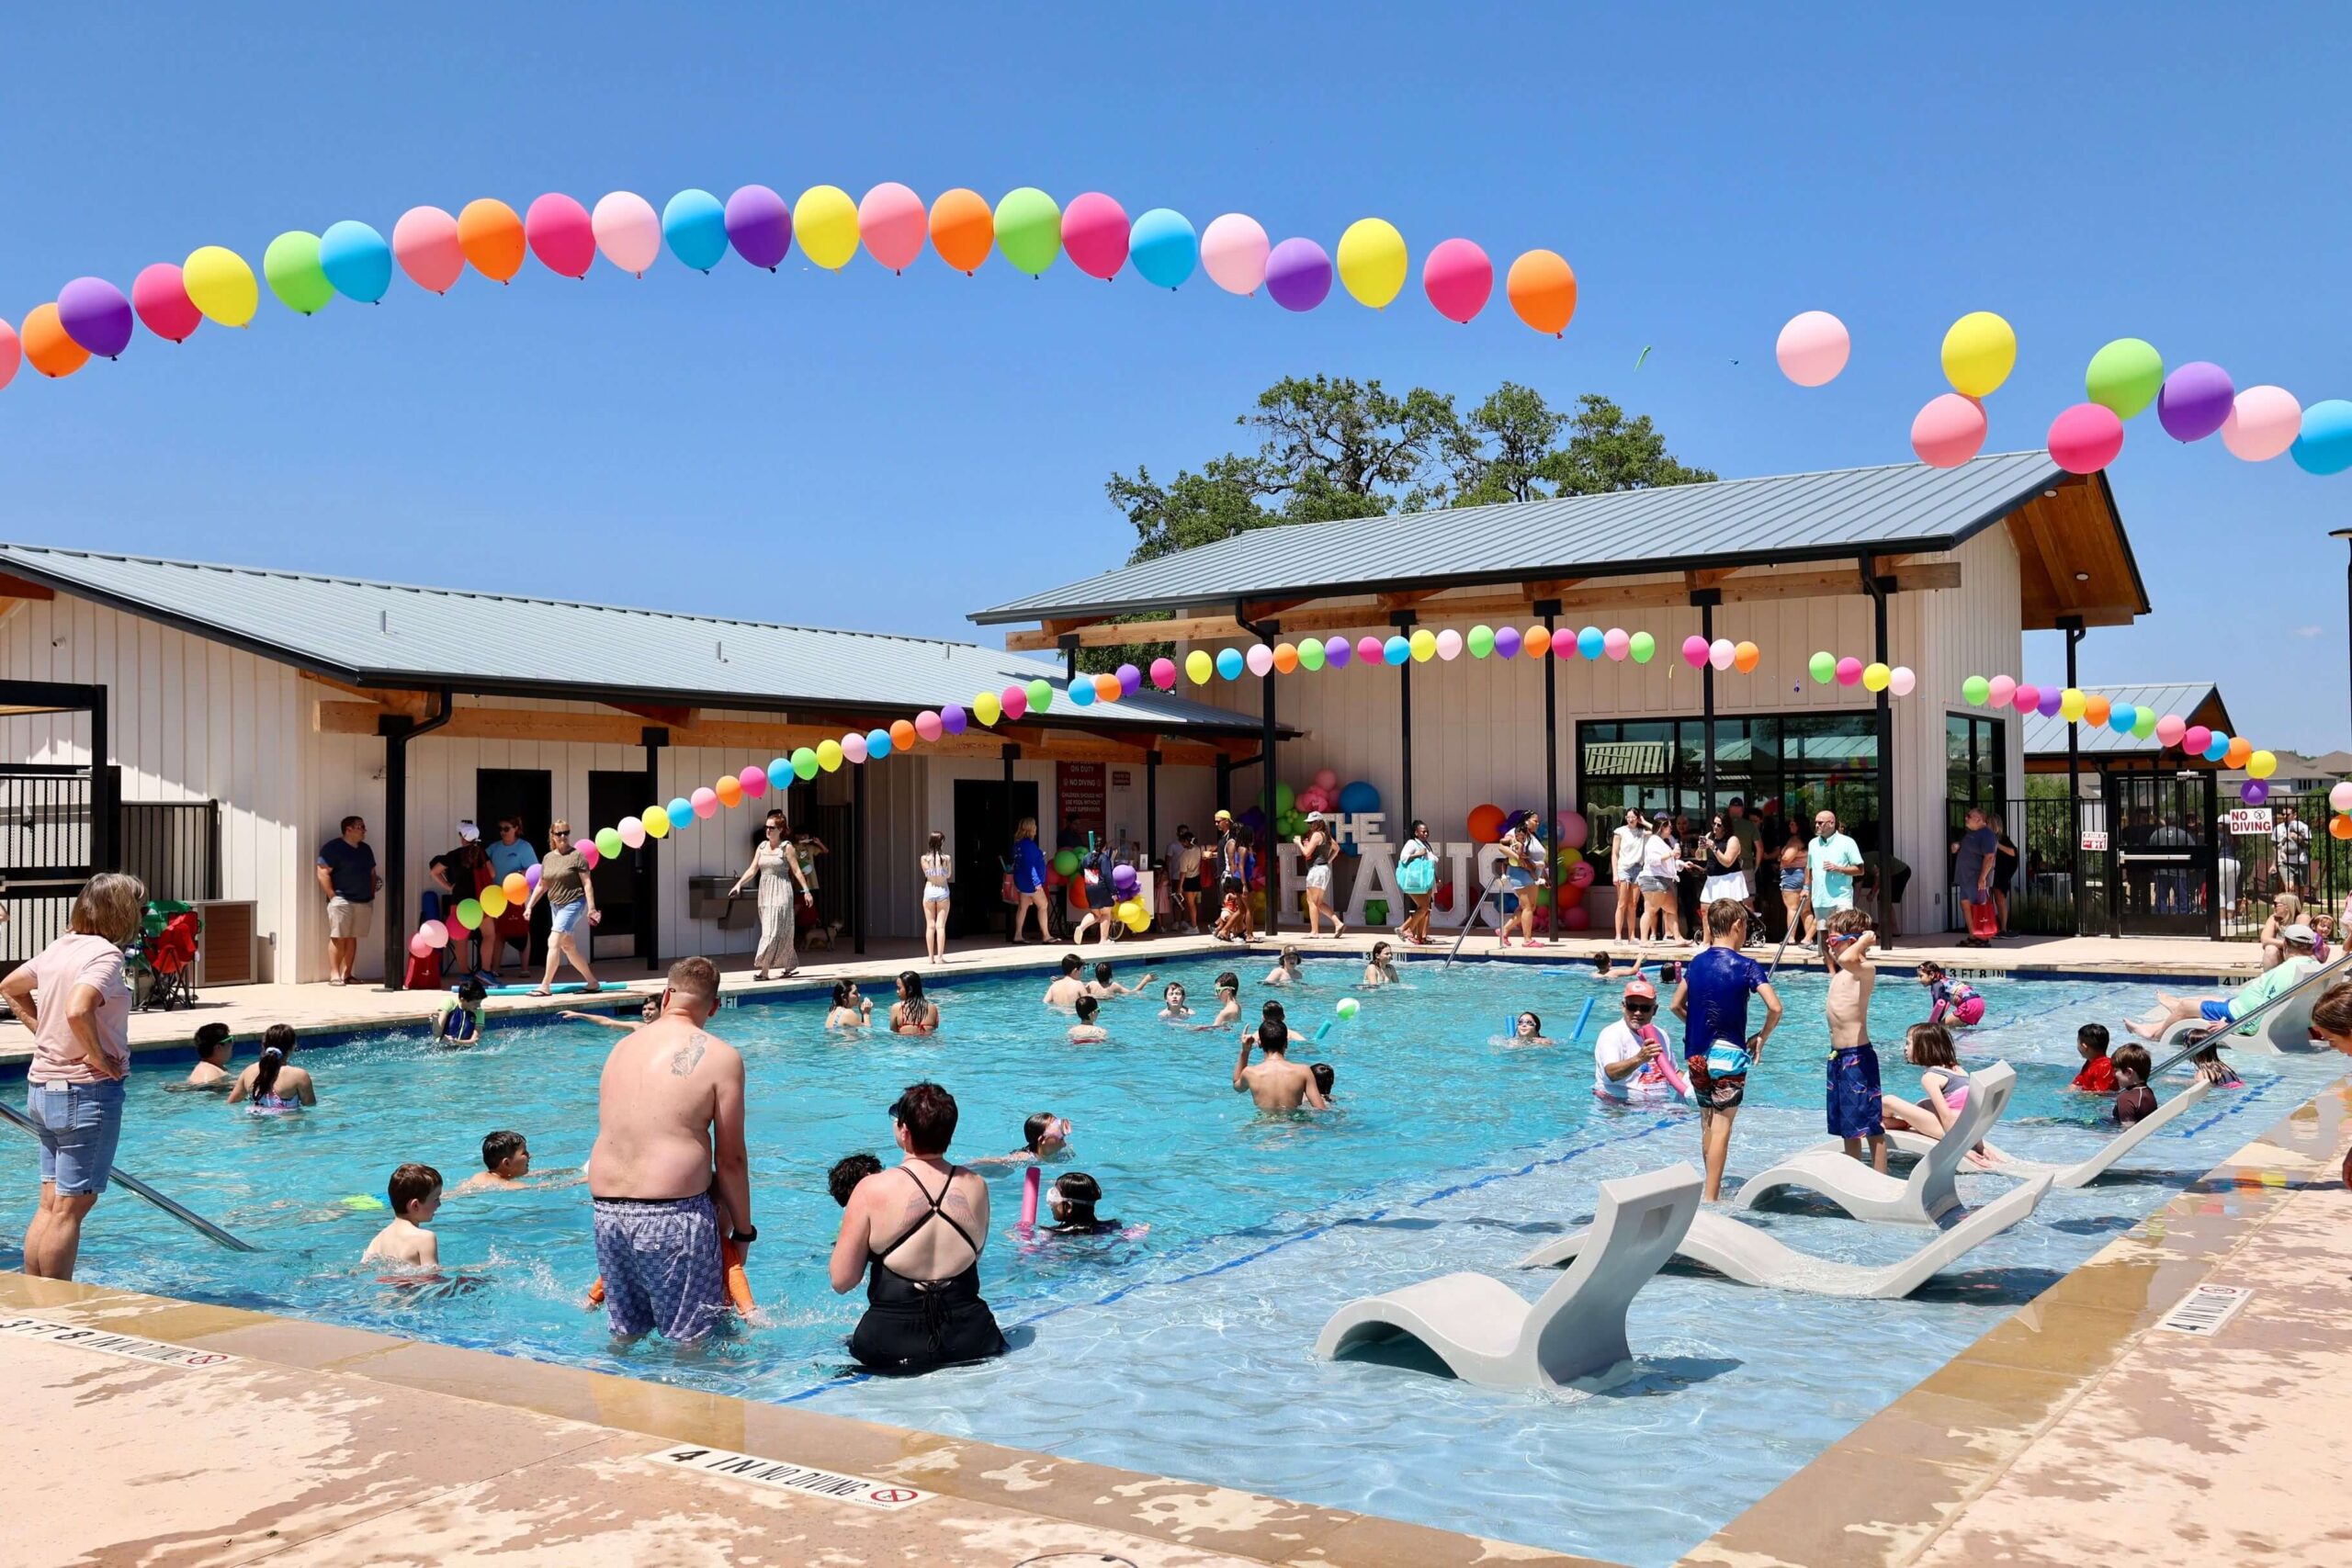 Families playing in the pool with balloons overhead at the Haus grand opening event at Meyer Ranch